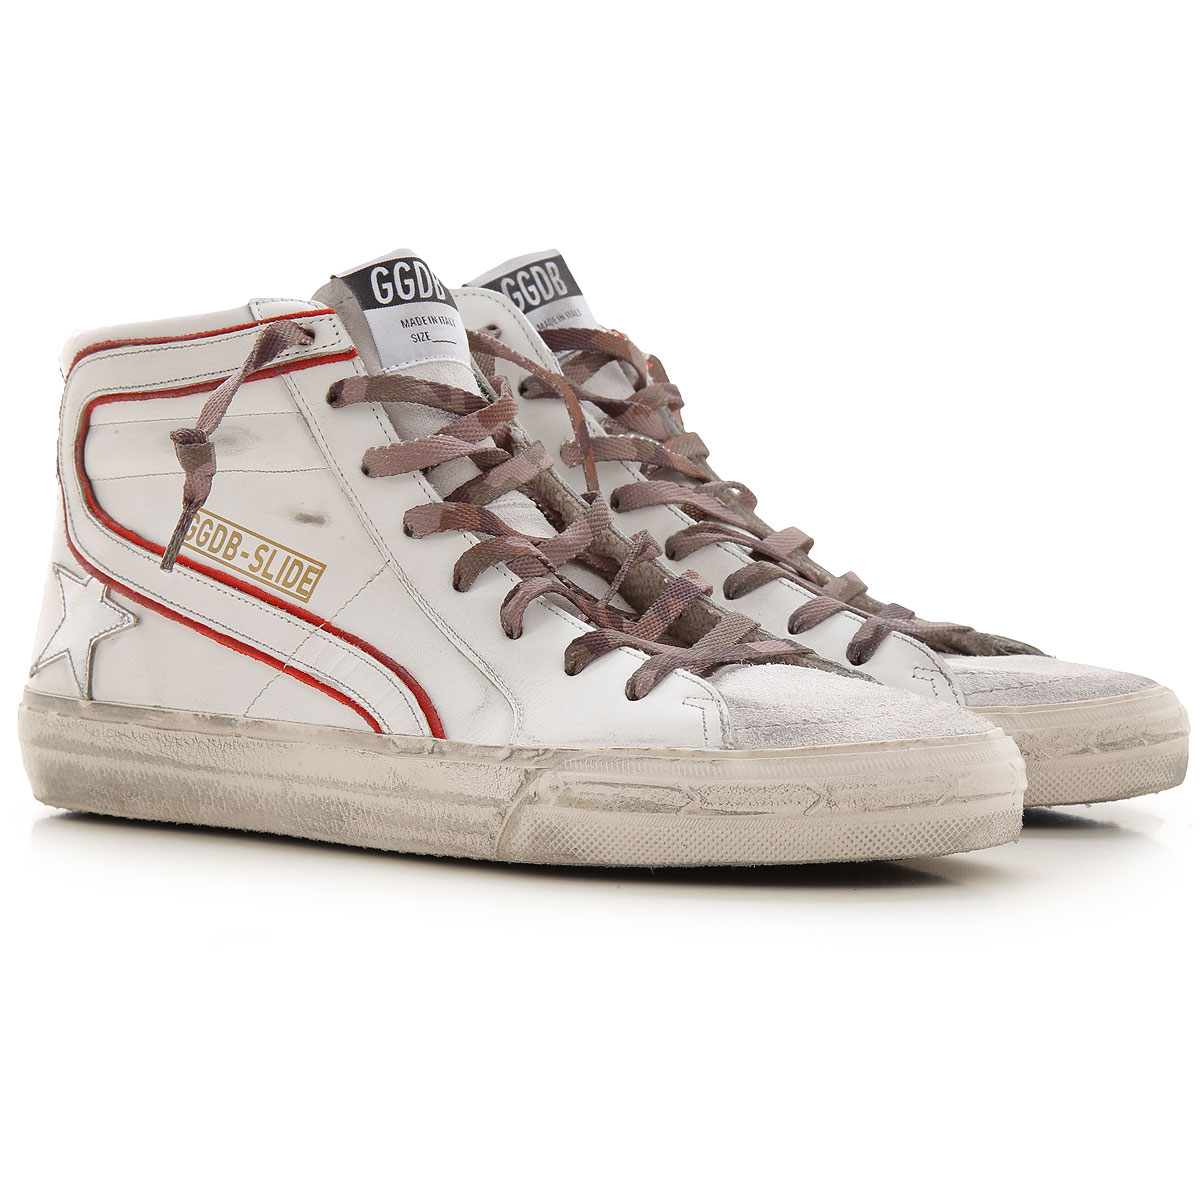 Mens Shoes Golden Goose, Style code: gmf00115-f000594-80185